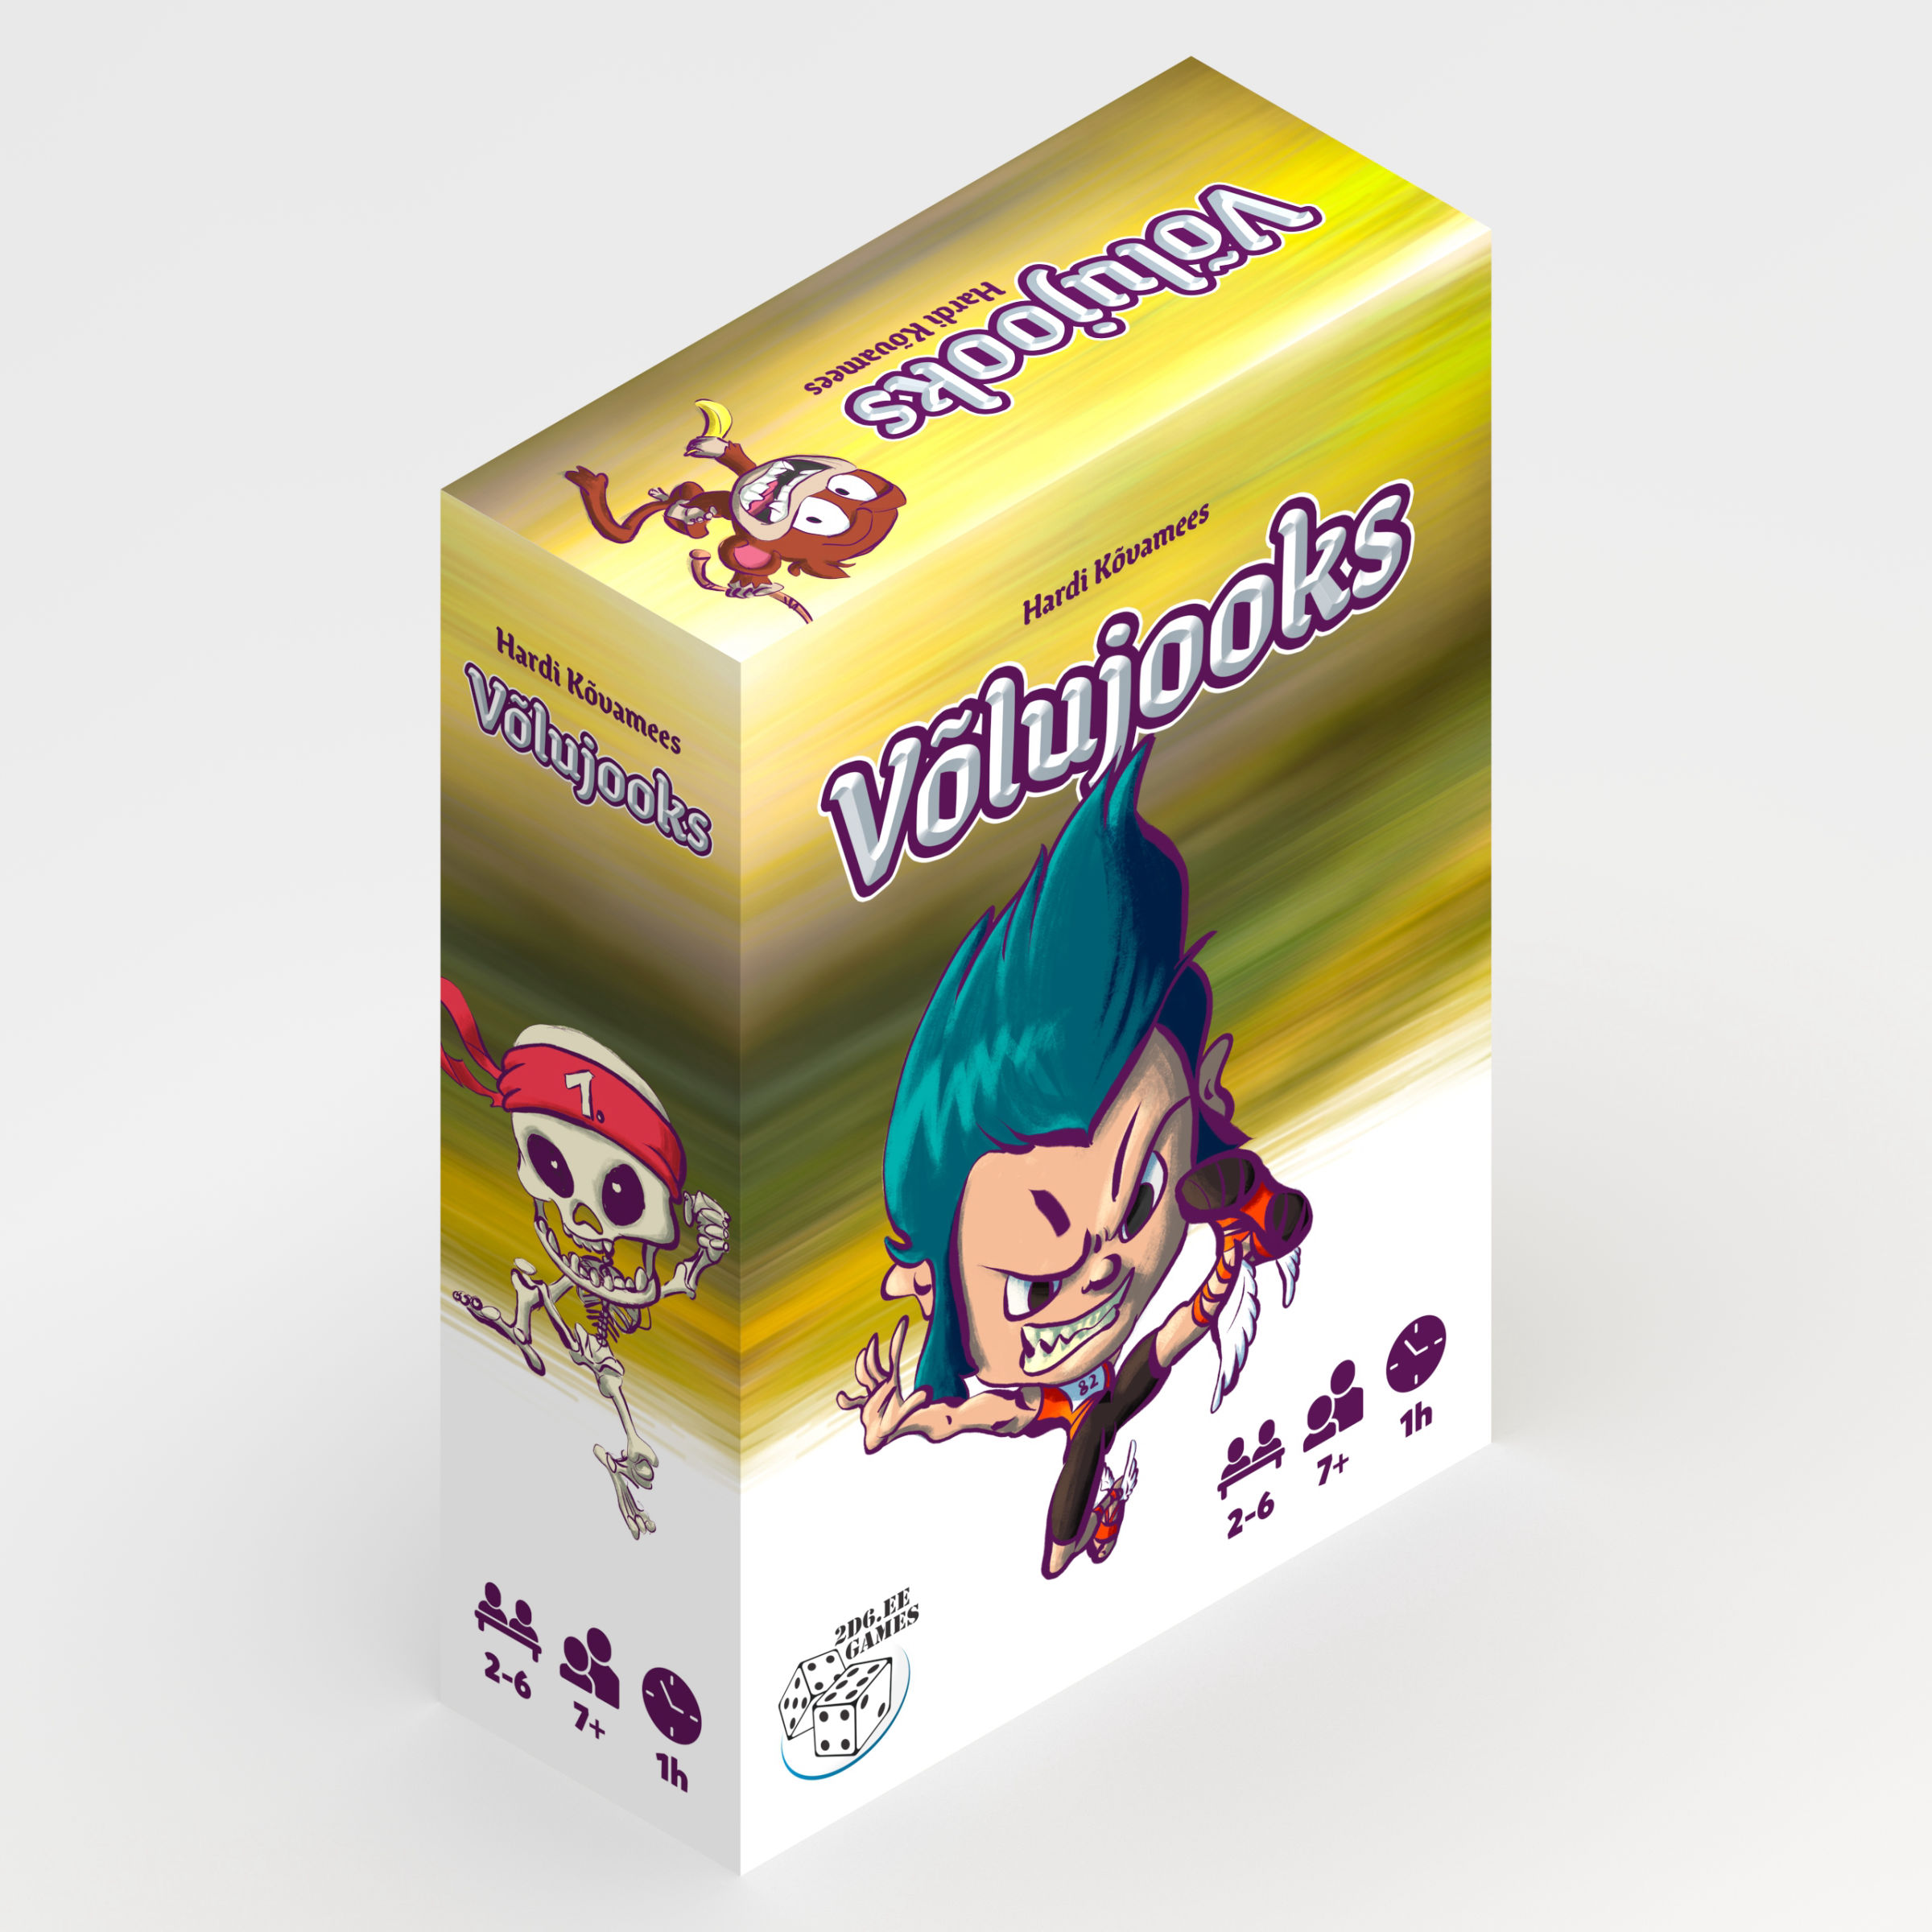 3D mockup of the game box